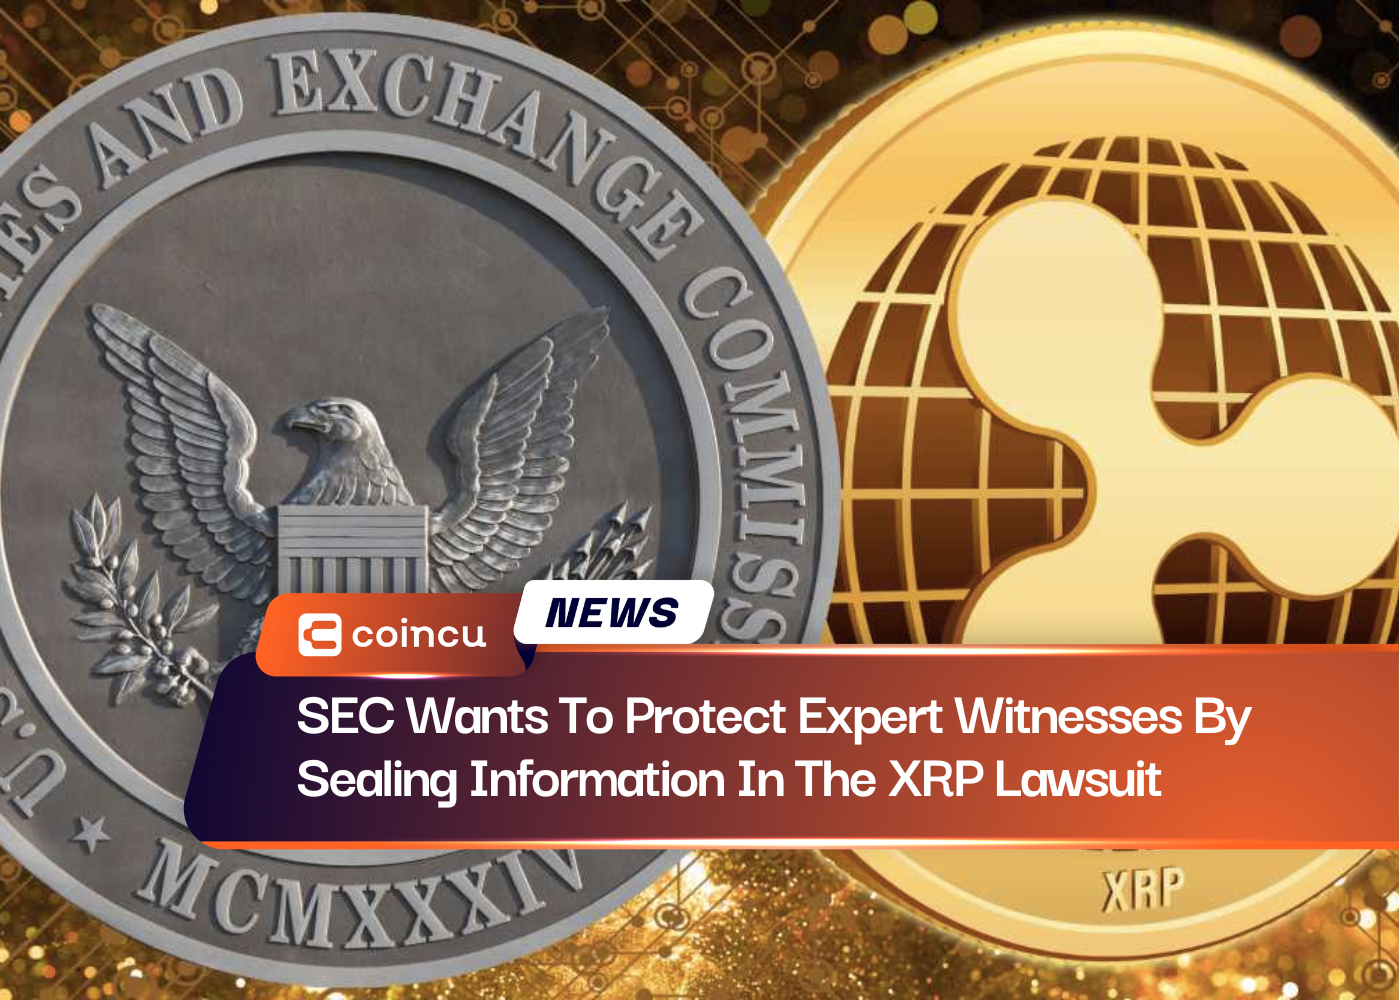 SEC Wants To Protect Expert Witnesses By Sealing Information In The XRP Lawsuit